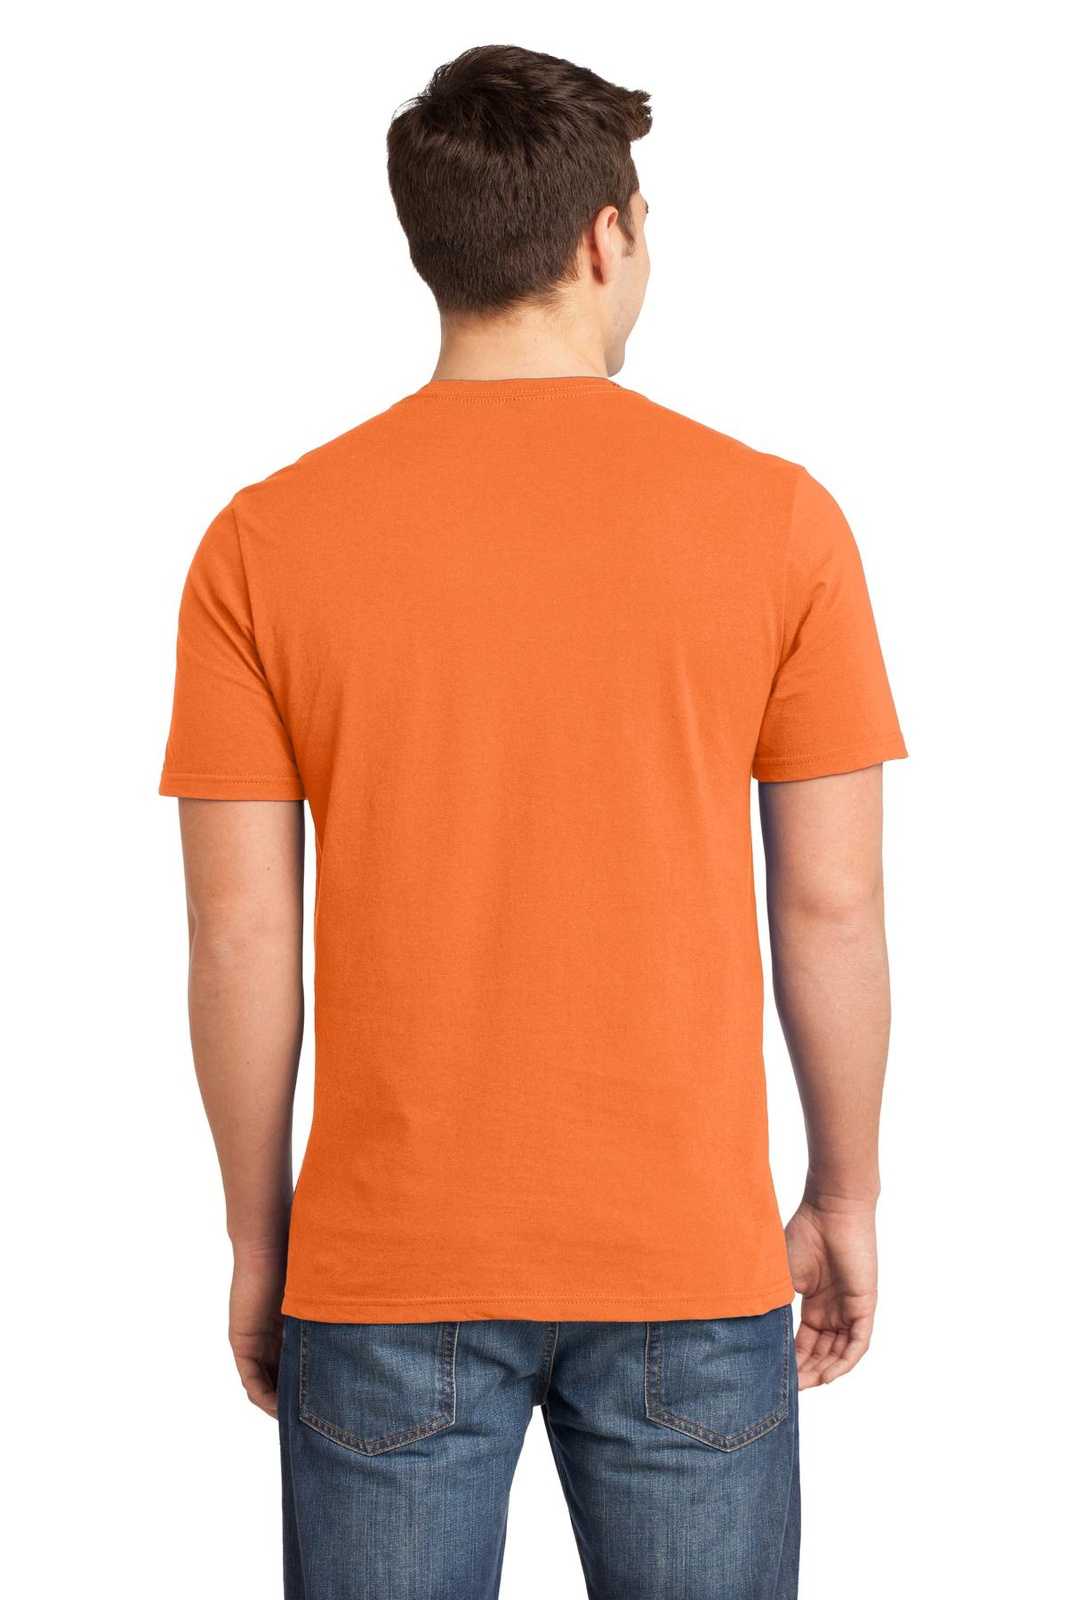 District DT6000 Very Important Tee - Orange - HIT a Double - 2